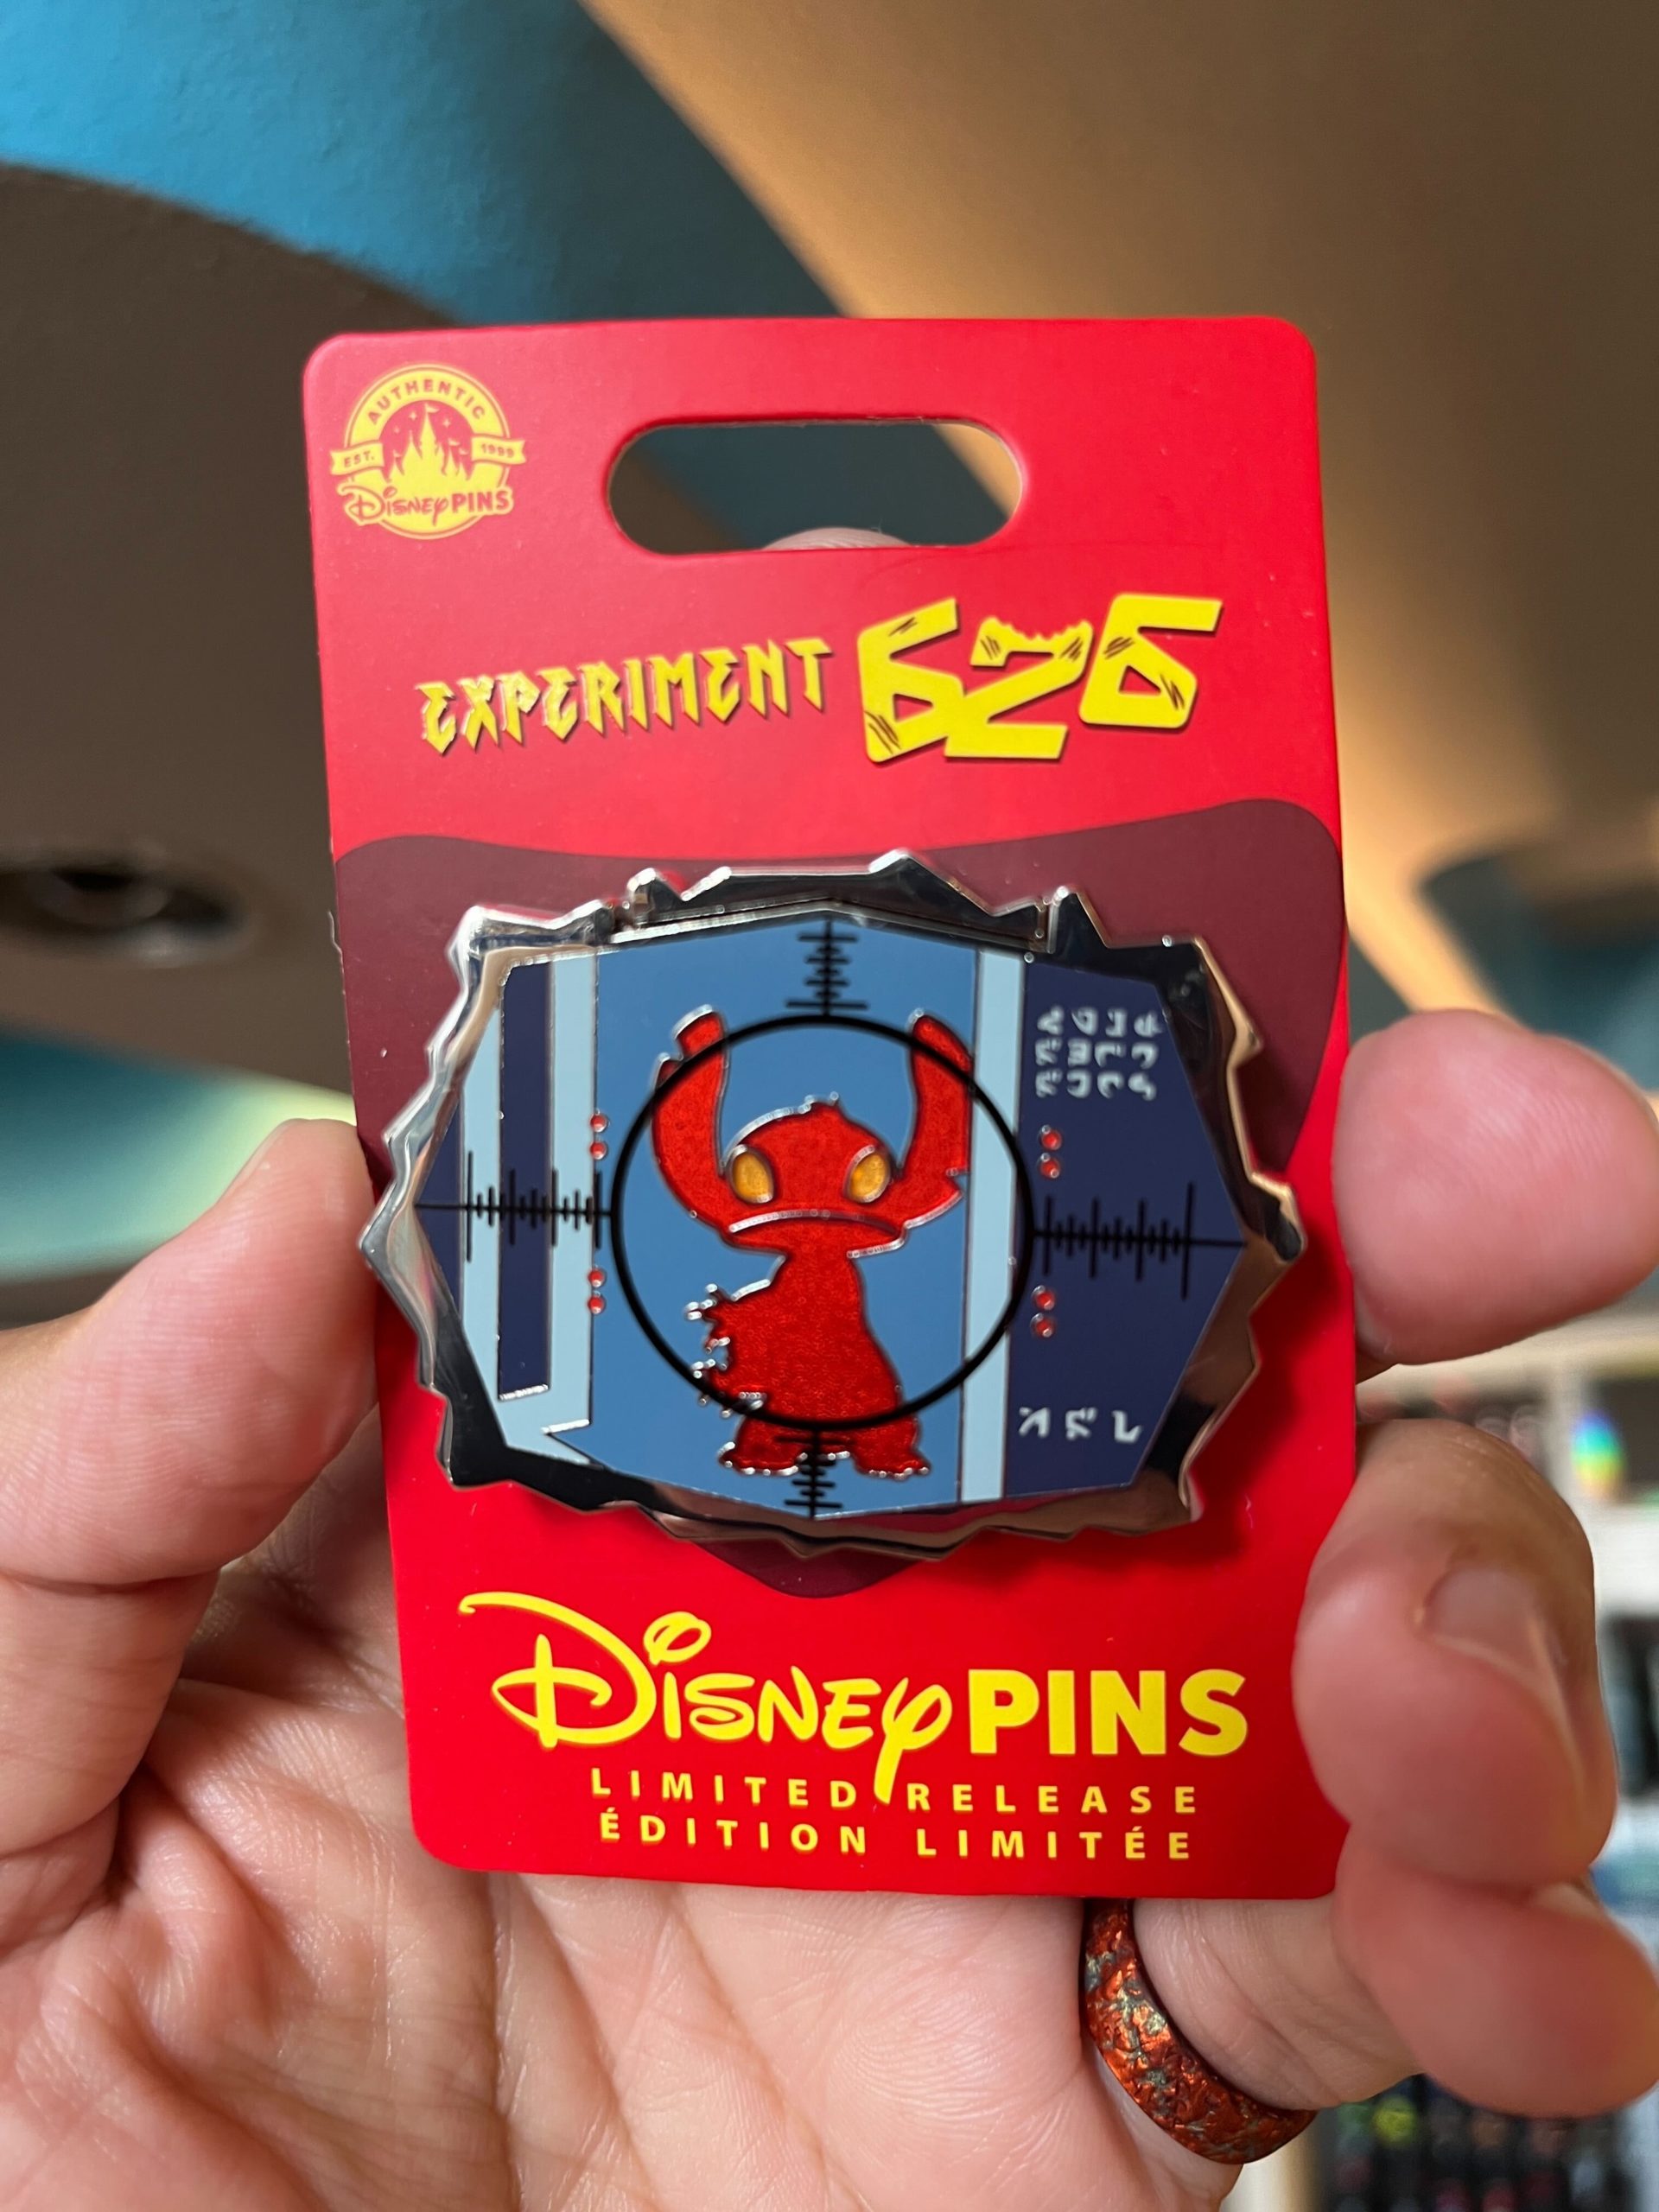 Celebrate Stitch Day with This Wave of Experiment 626 Merchandise!